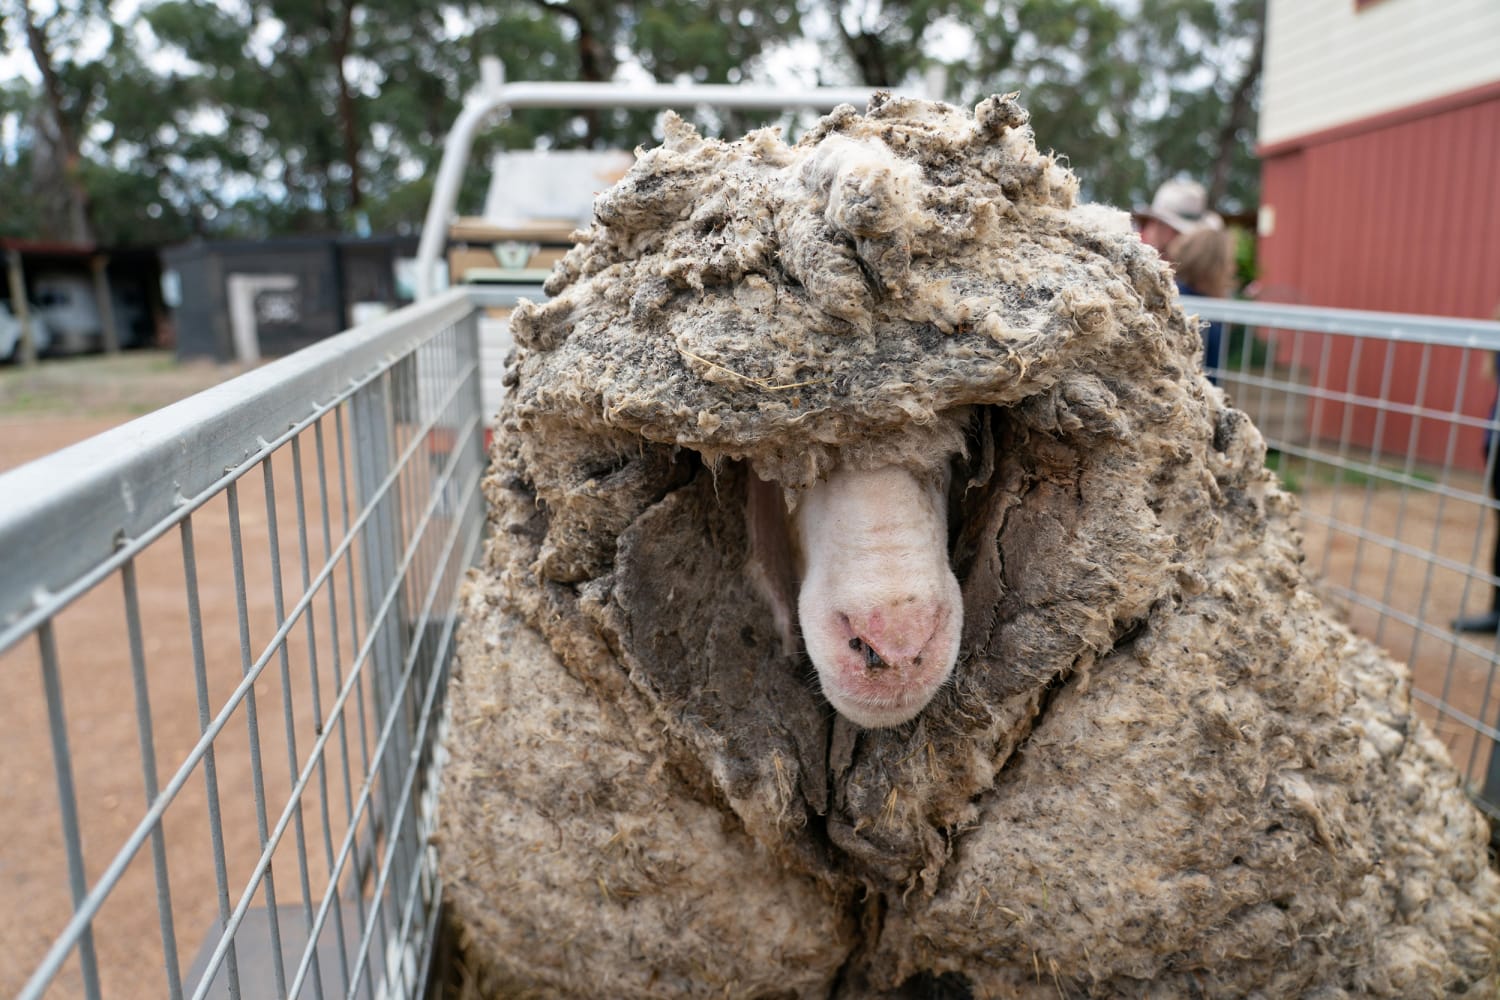 A Sheep In Super Heavy Clothing! 80 Pounds Of Pure Wool Burden Lone  Creature